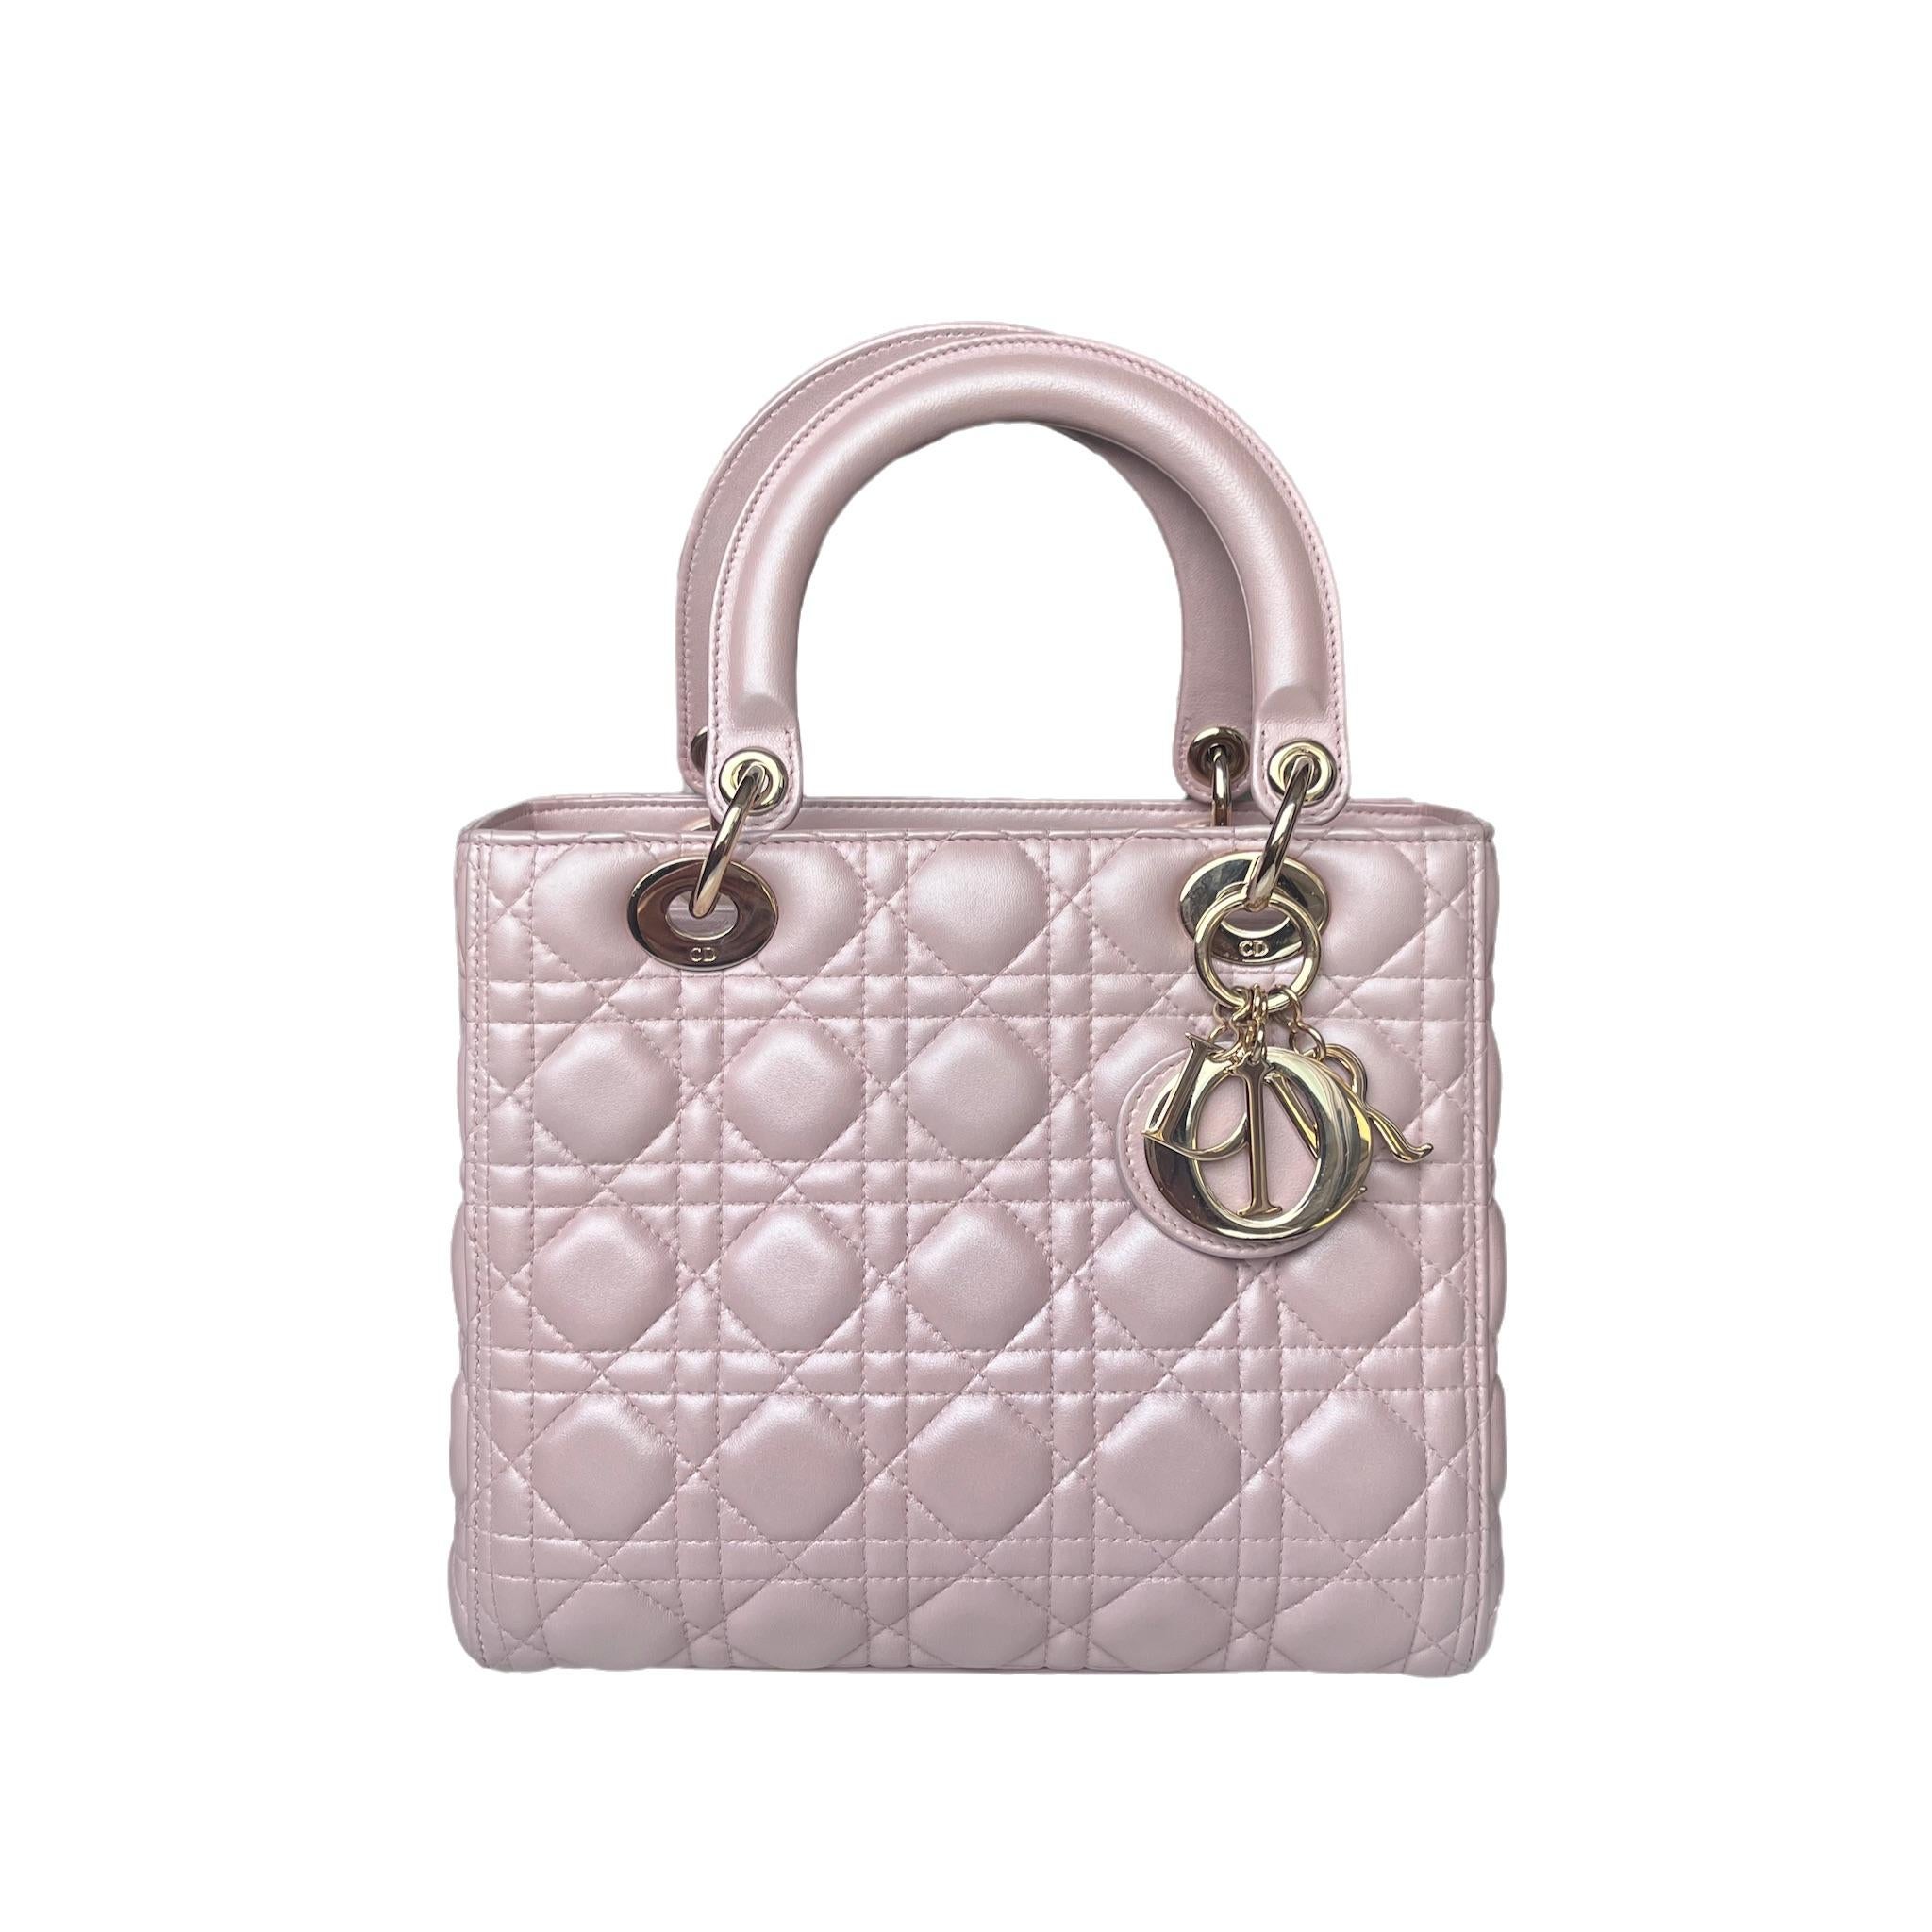 The Lady Dior bag is an epitome of elegance and beauty. Accentuate your look with the timeless style of Medium Lady Dior, crafted in Pearlescent Pink Lambskin Leather. This classic bag features a cannage stitch, creating a beautiful silhouette and